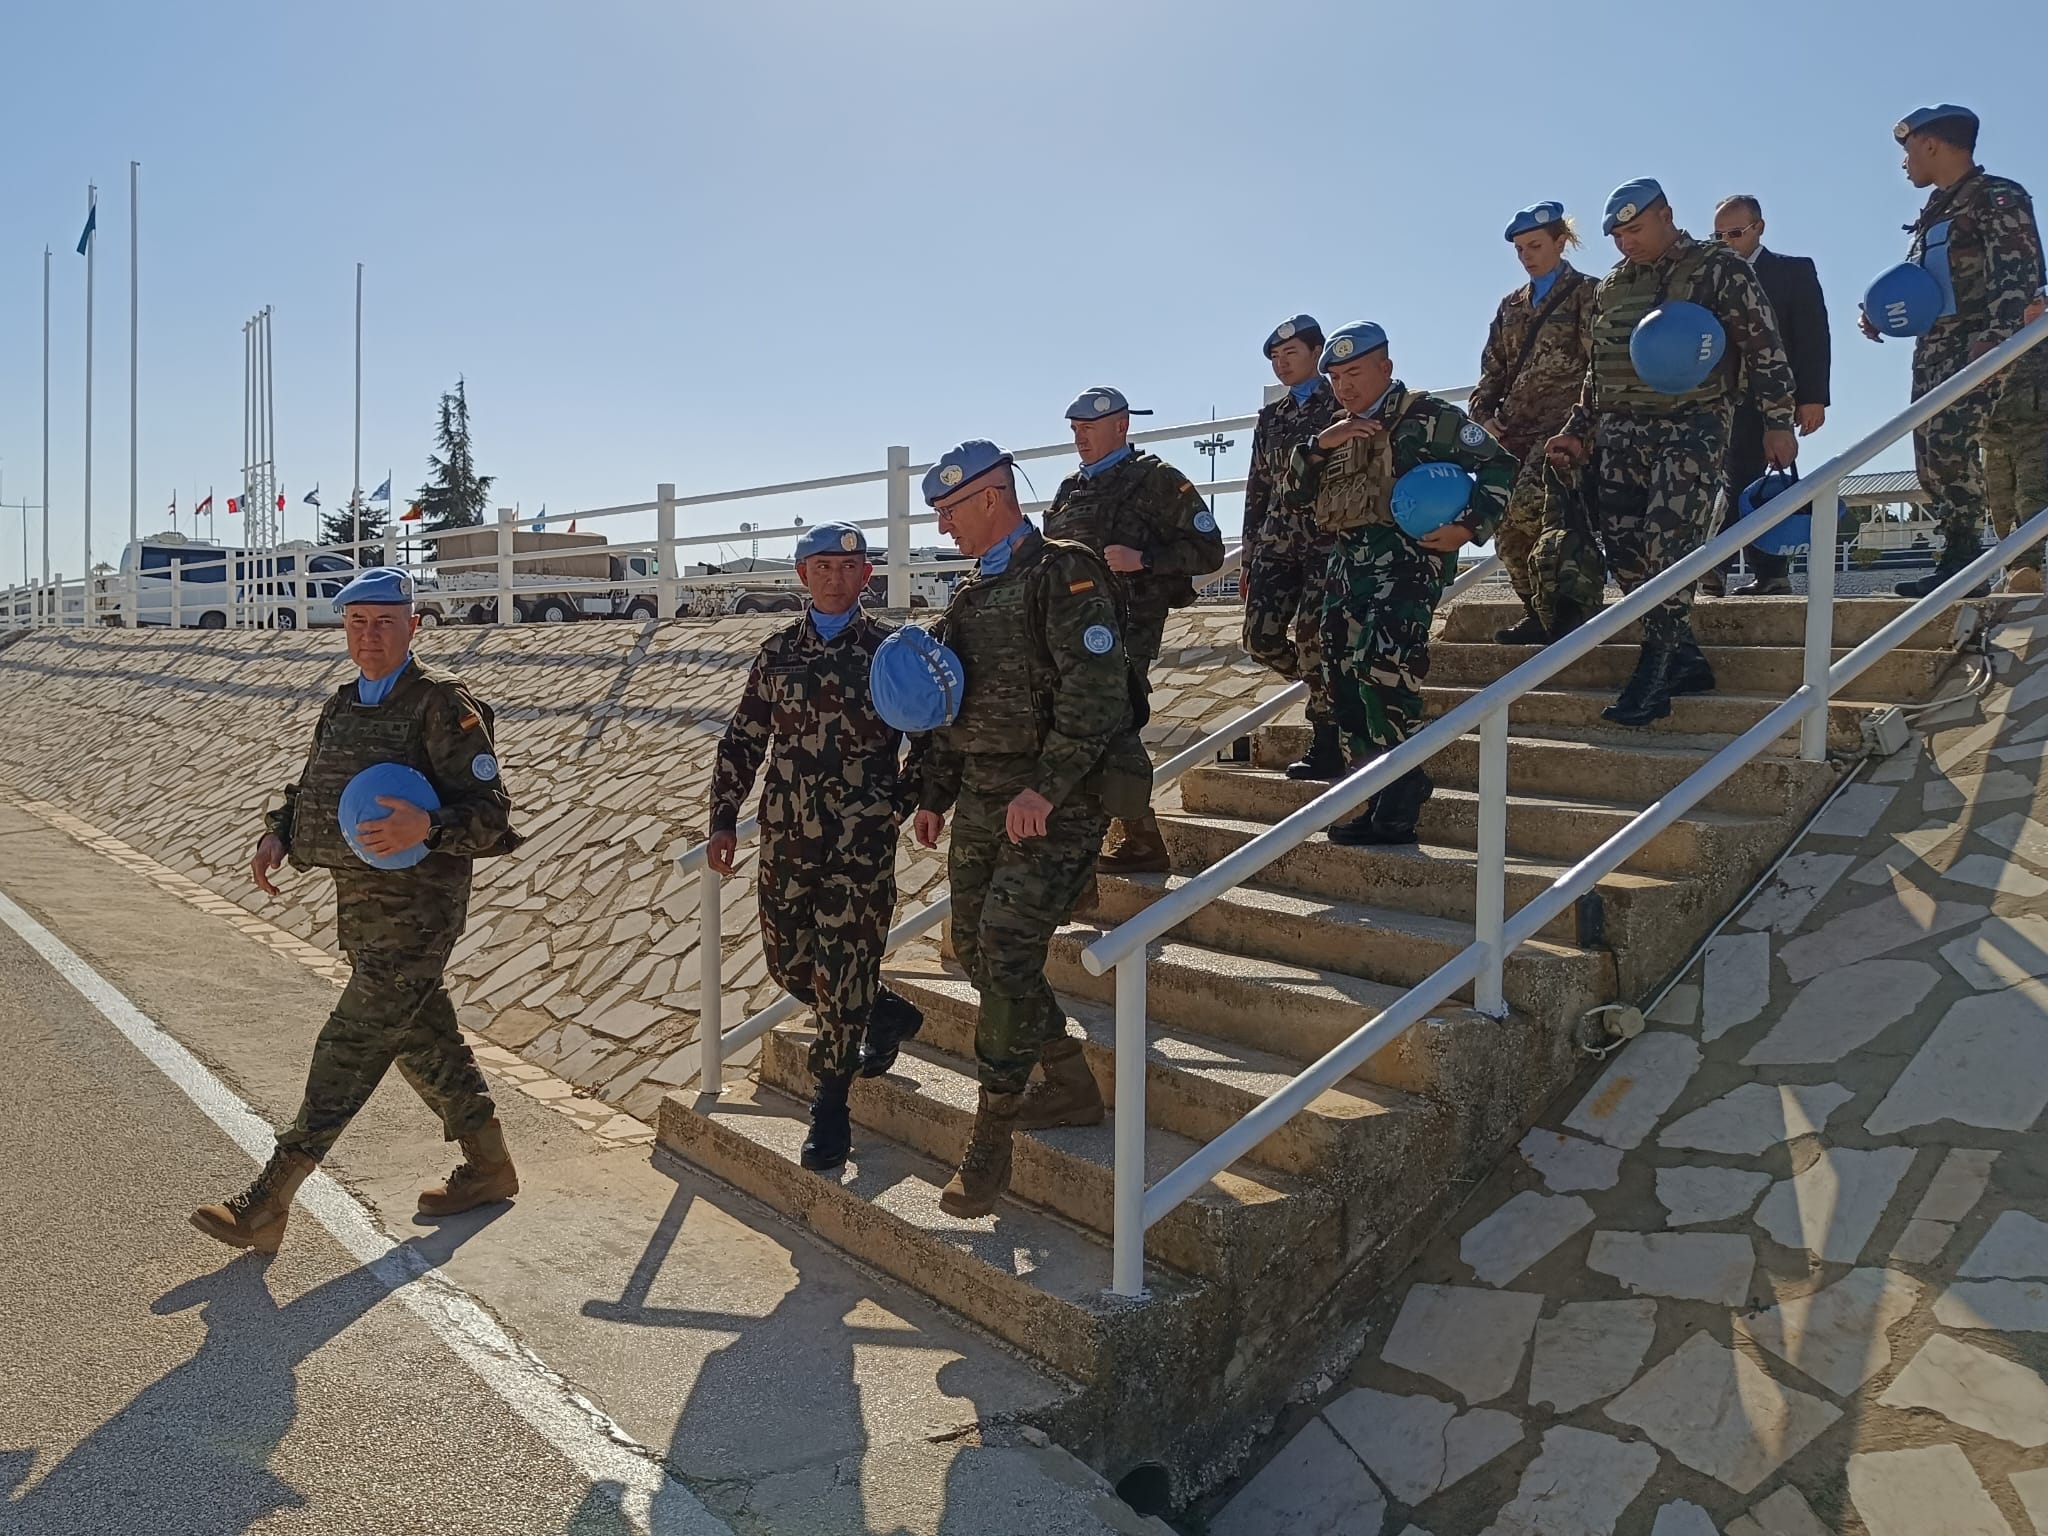 Handover of mission leadership in Sector East UNIFIL